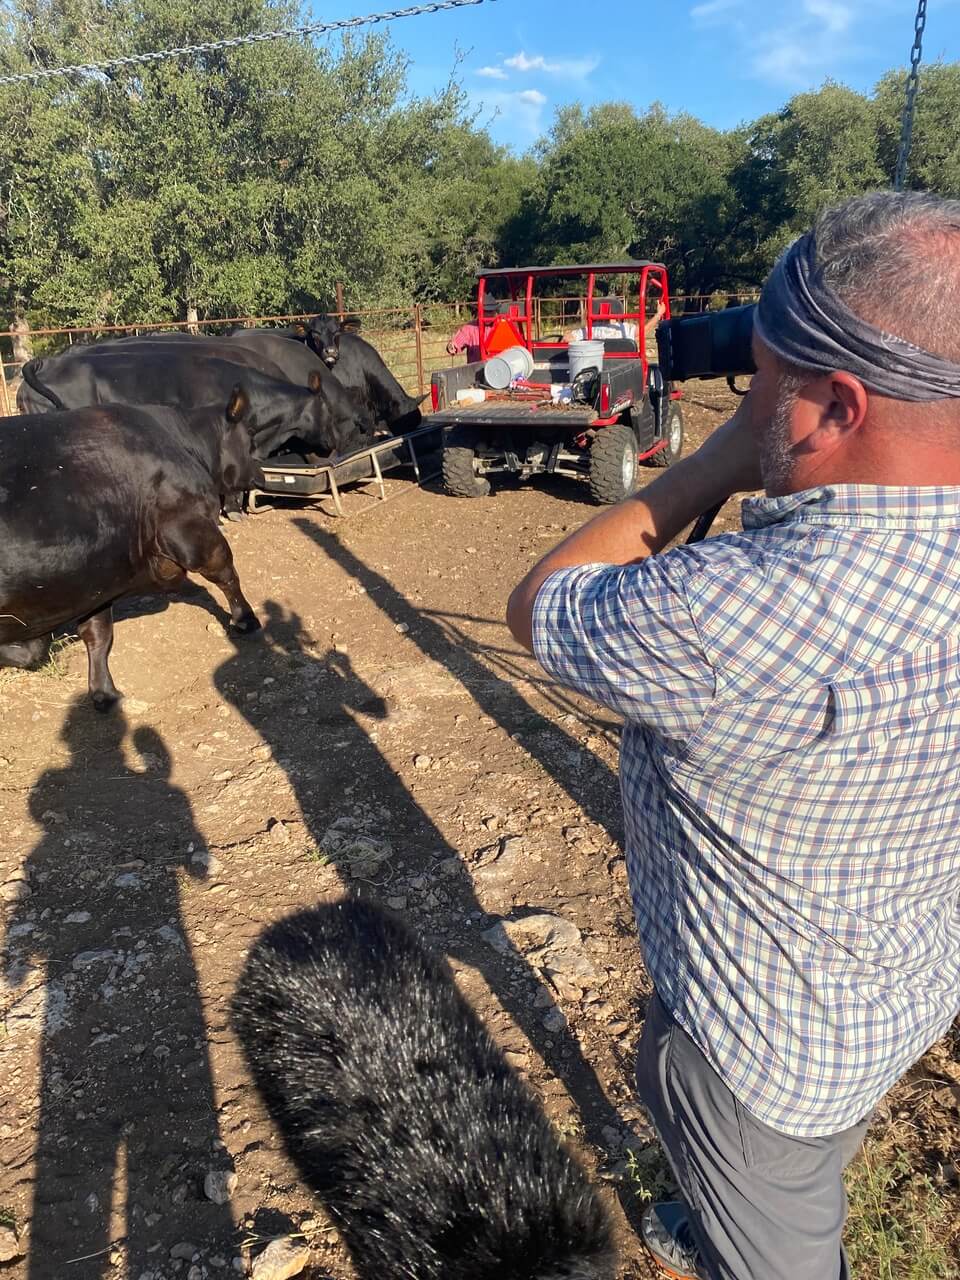 B-roll of cattle being fed on the Lindsey Ranch being recorded